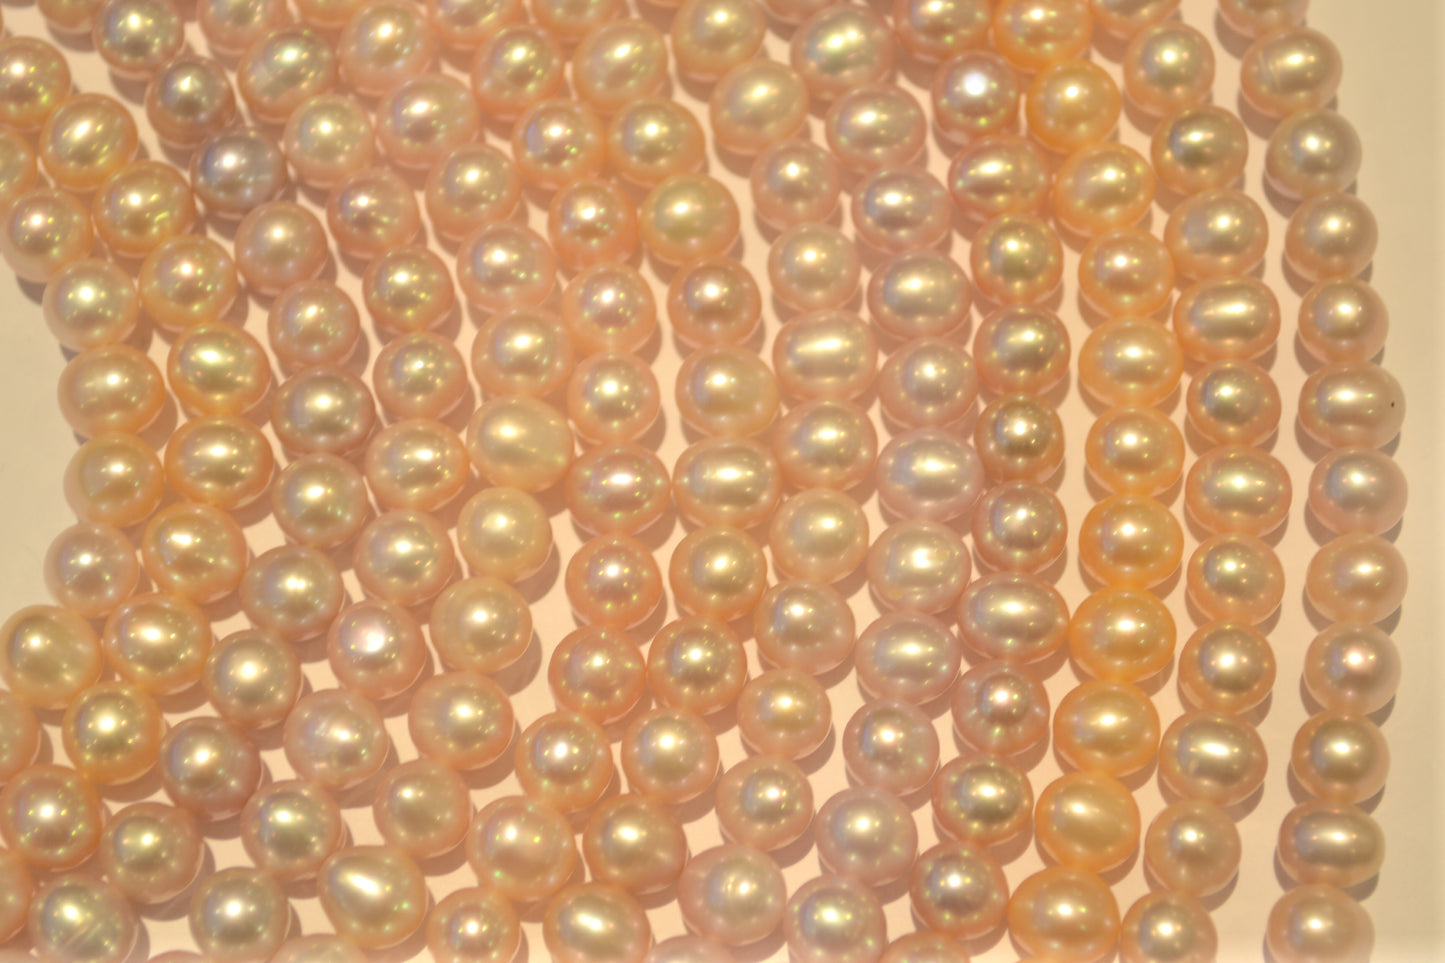 10-11mm pink round freshwater pearl strand